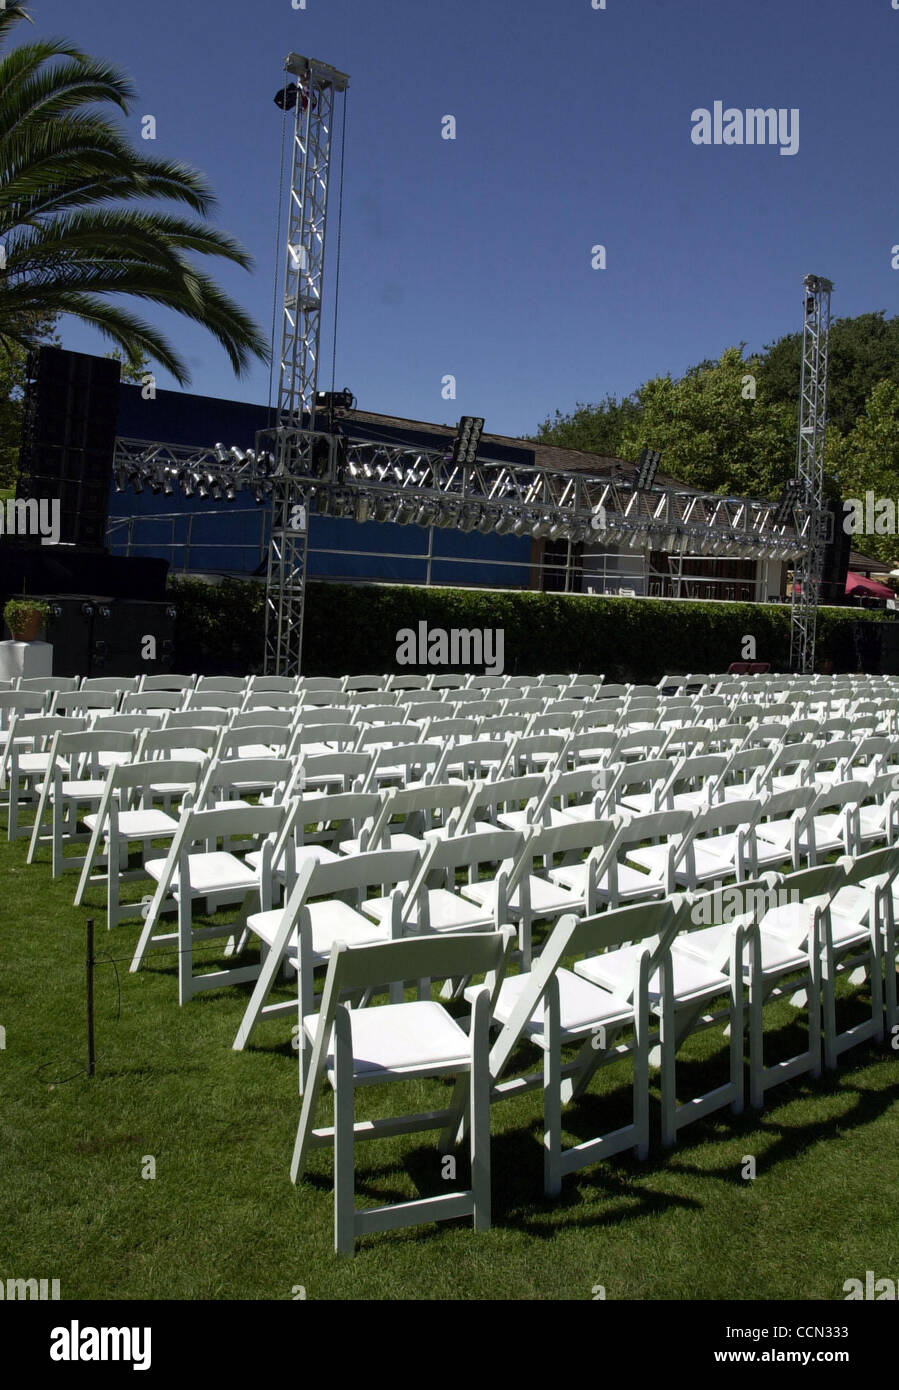 The Linda Ronstadt concert at The Concerts At Wente Vineyards will go on as scheduled Thursday evening. On Tuesday, July 20, 2004, in Livermore, Calif., it was life as usual where tables and chairs are set for Wednesday's Hootie and the Blowfish concert. Ronstadt was booed in Las Vegas earlier this  Stock Photo